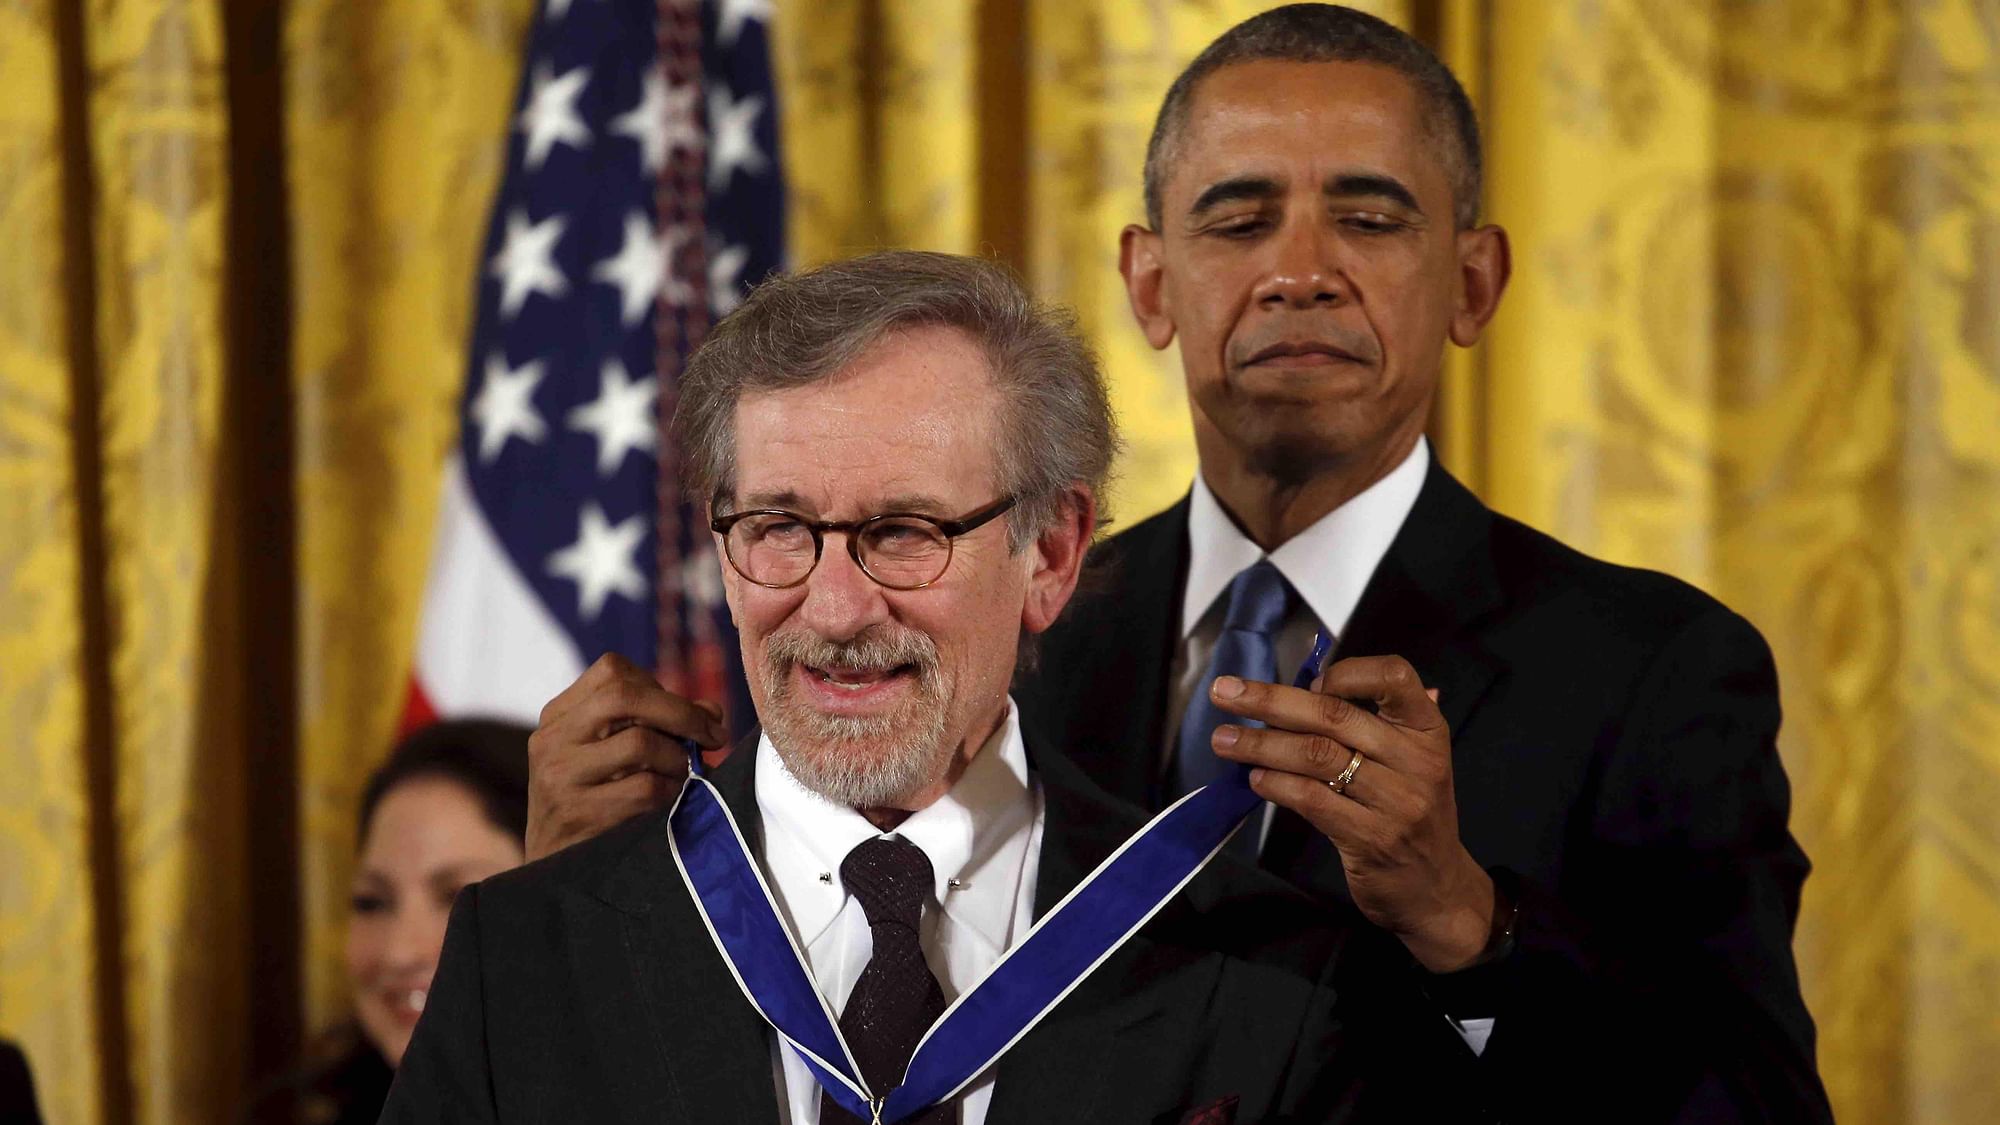 US President Barack Obama presents the Presidential Medal of Freedom to film director Steven Spielberg during an event in the East Room of the White House in Washington on November 24, 2015 (Photo: Reuters)